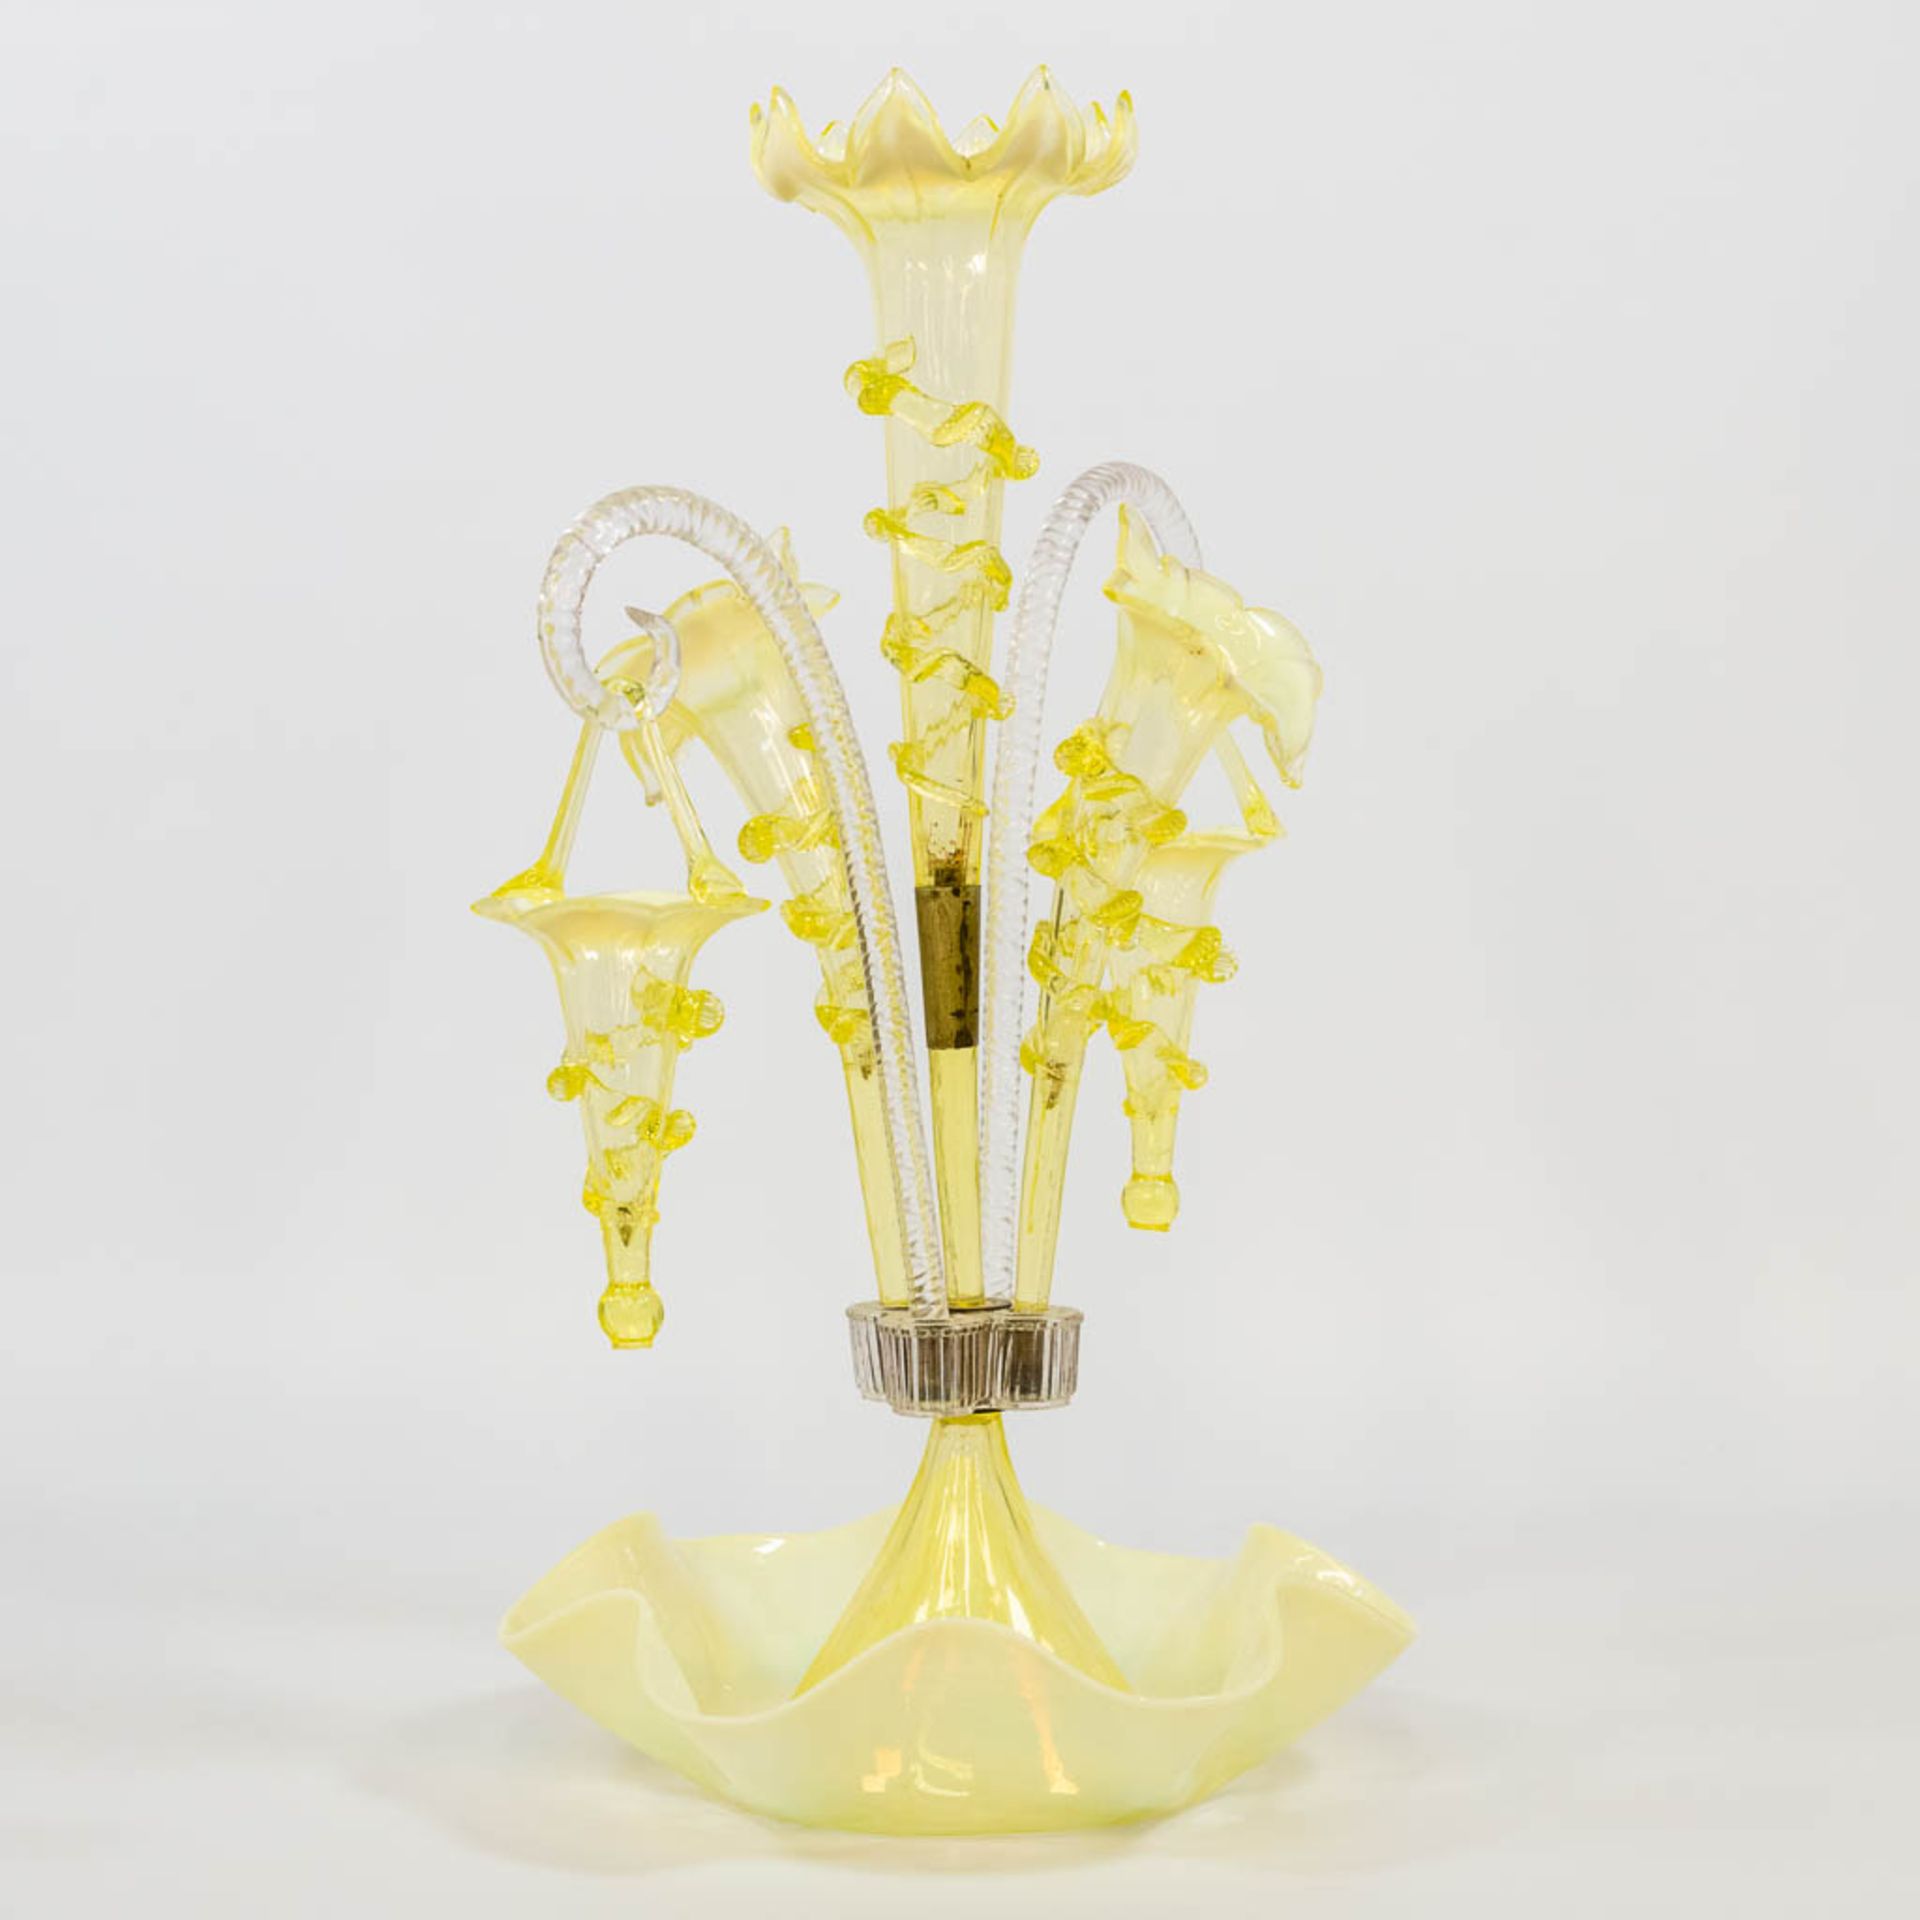 A yellow and clear glass table centrepiece pic-fleur, made in Murano, Italy. (25 x 28 x 45 cm) - Bild 3 aus 15